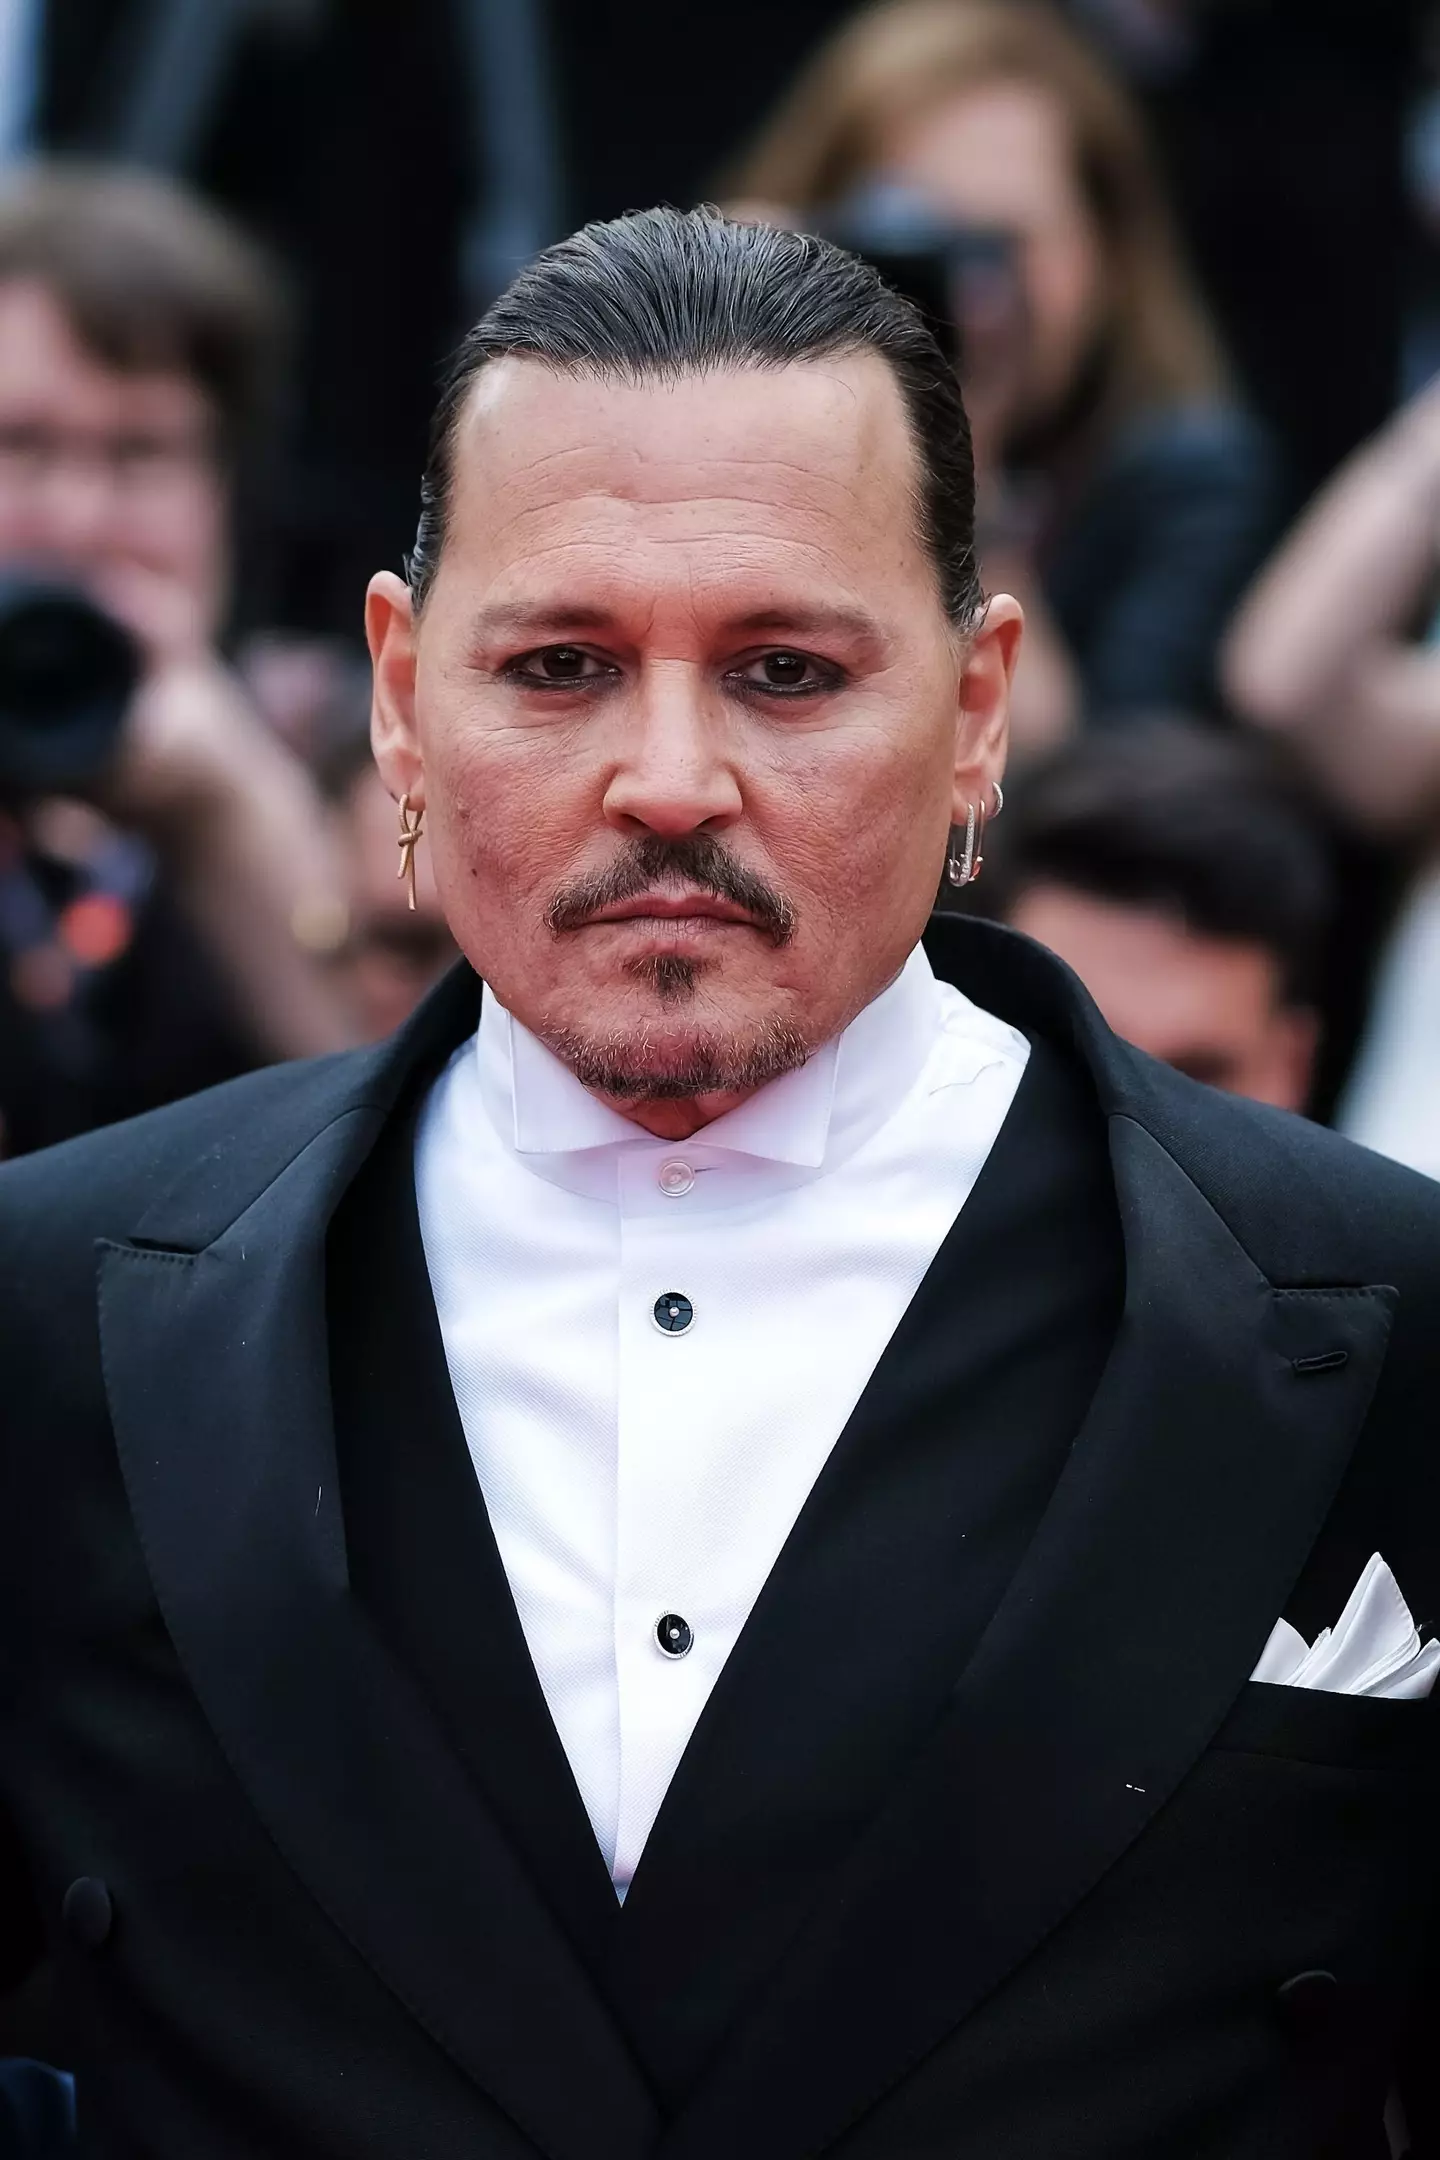 Johnny Depp at the Cannes Film Festival.